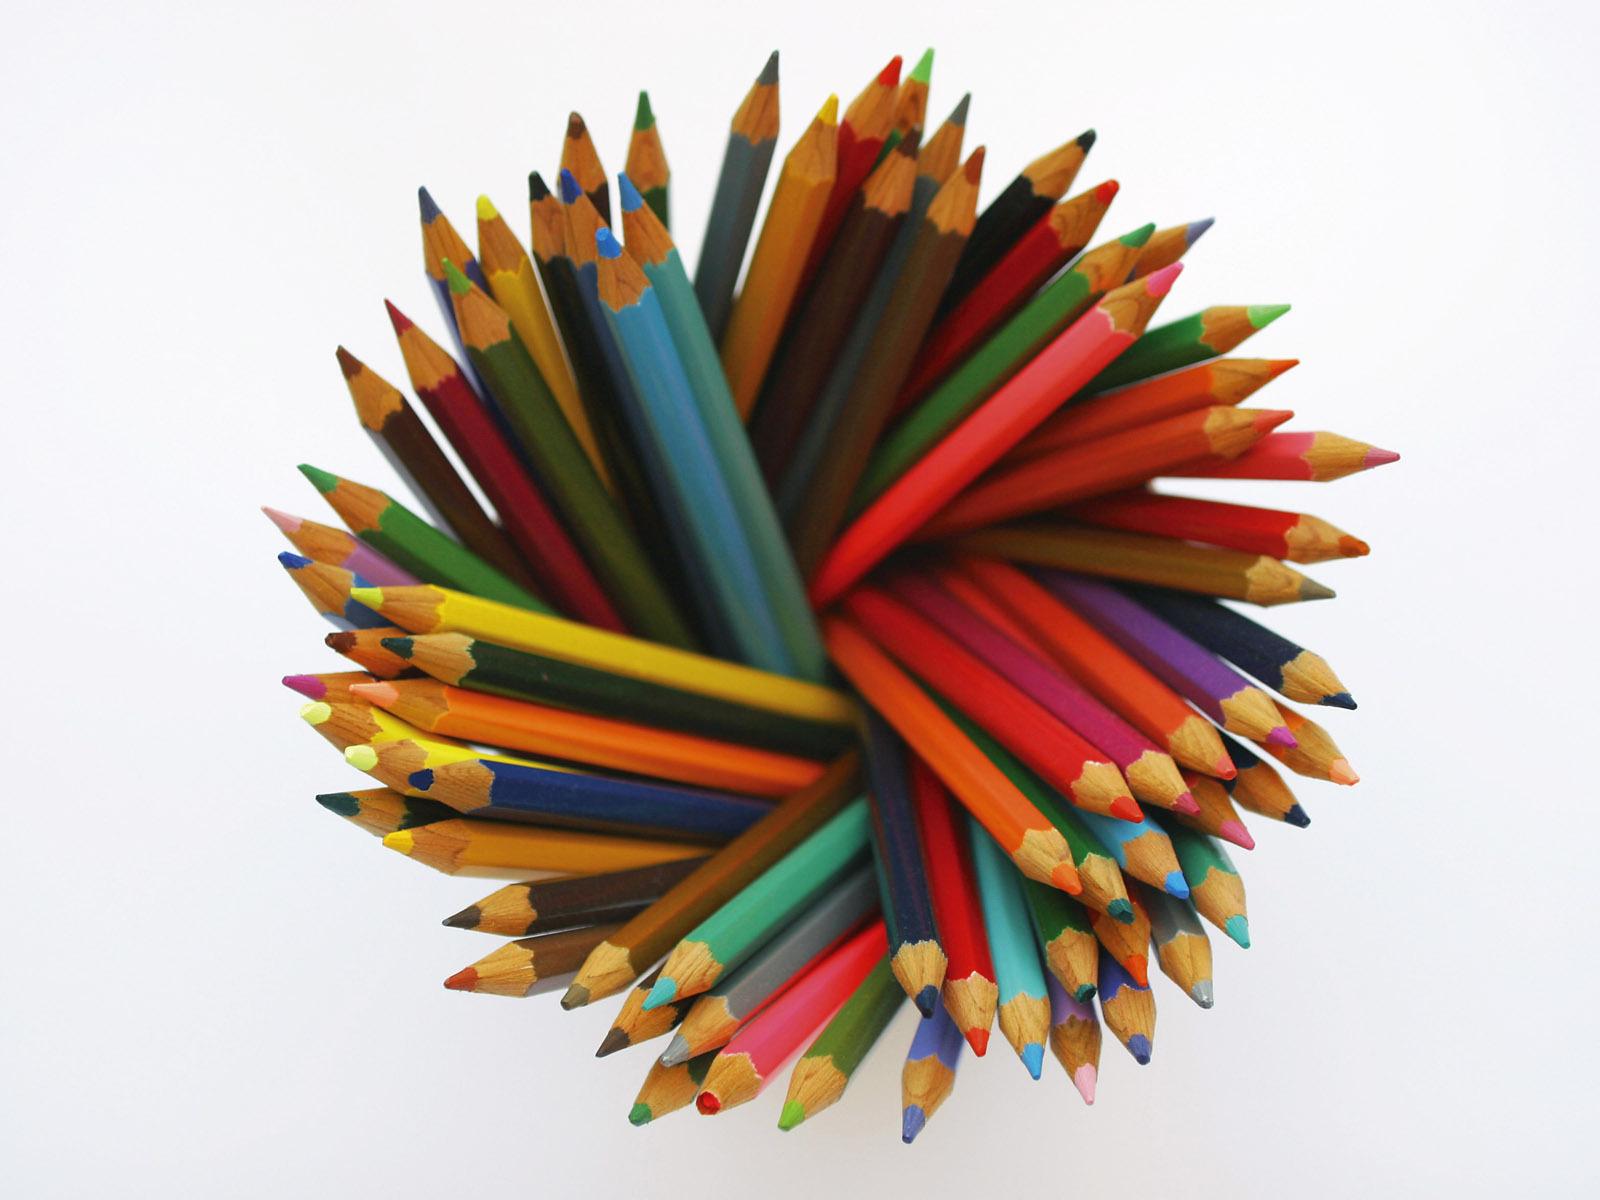 Pencil Wallpapers | HD Wallpapers | ID #19385